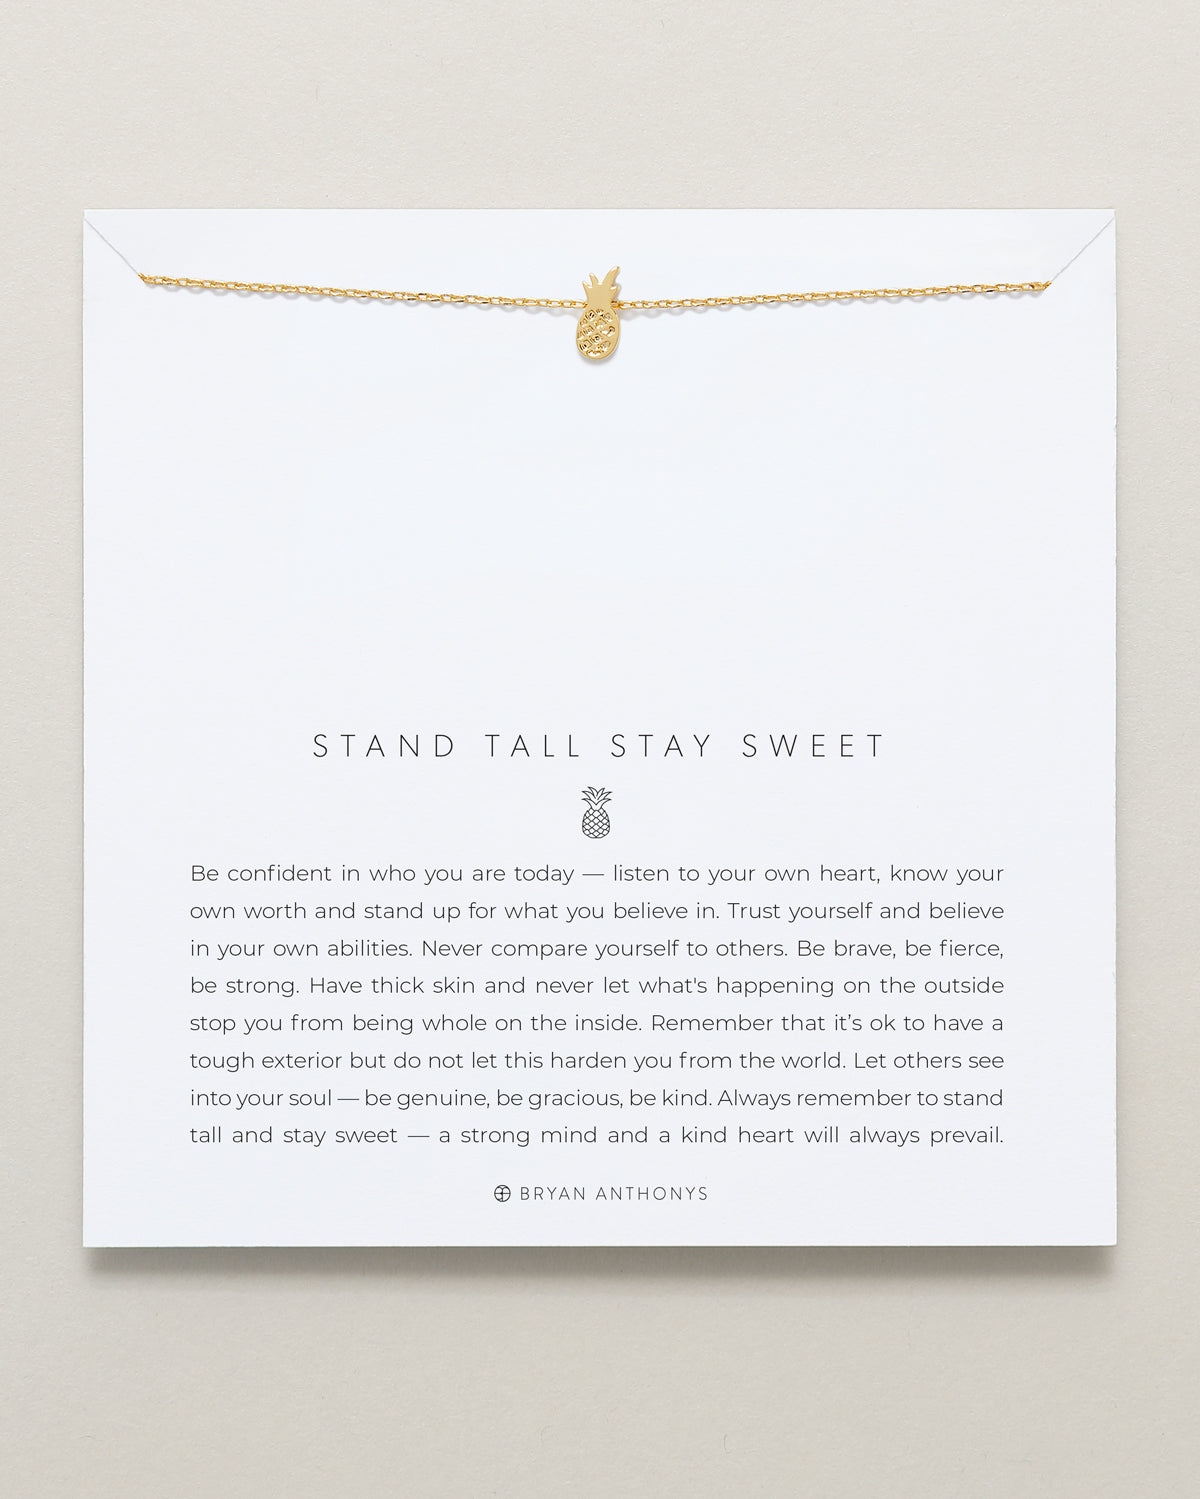 Bryan Anthonys Stand Tall Stay Sweet Gold Charm Necklace On Card